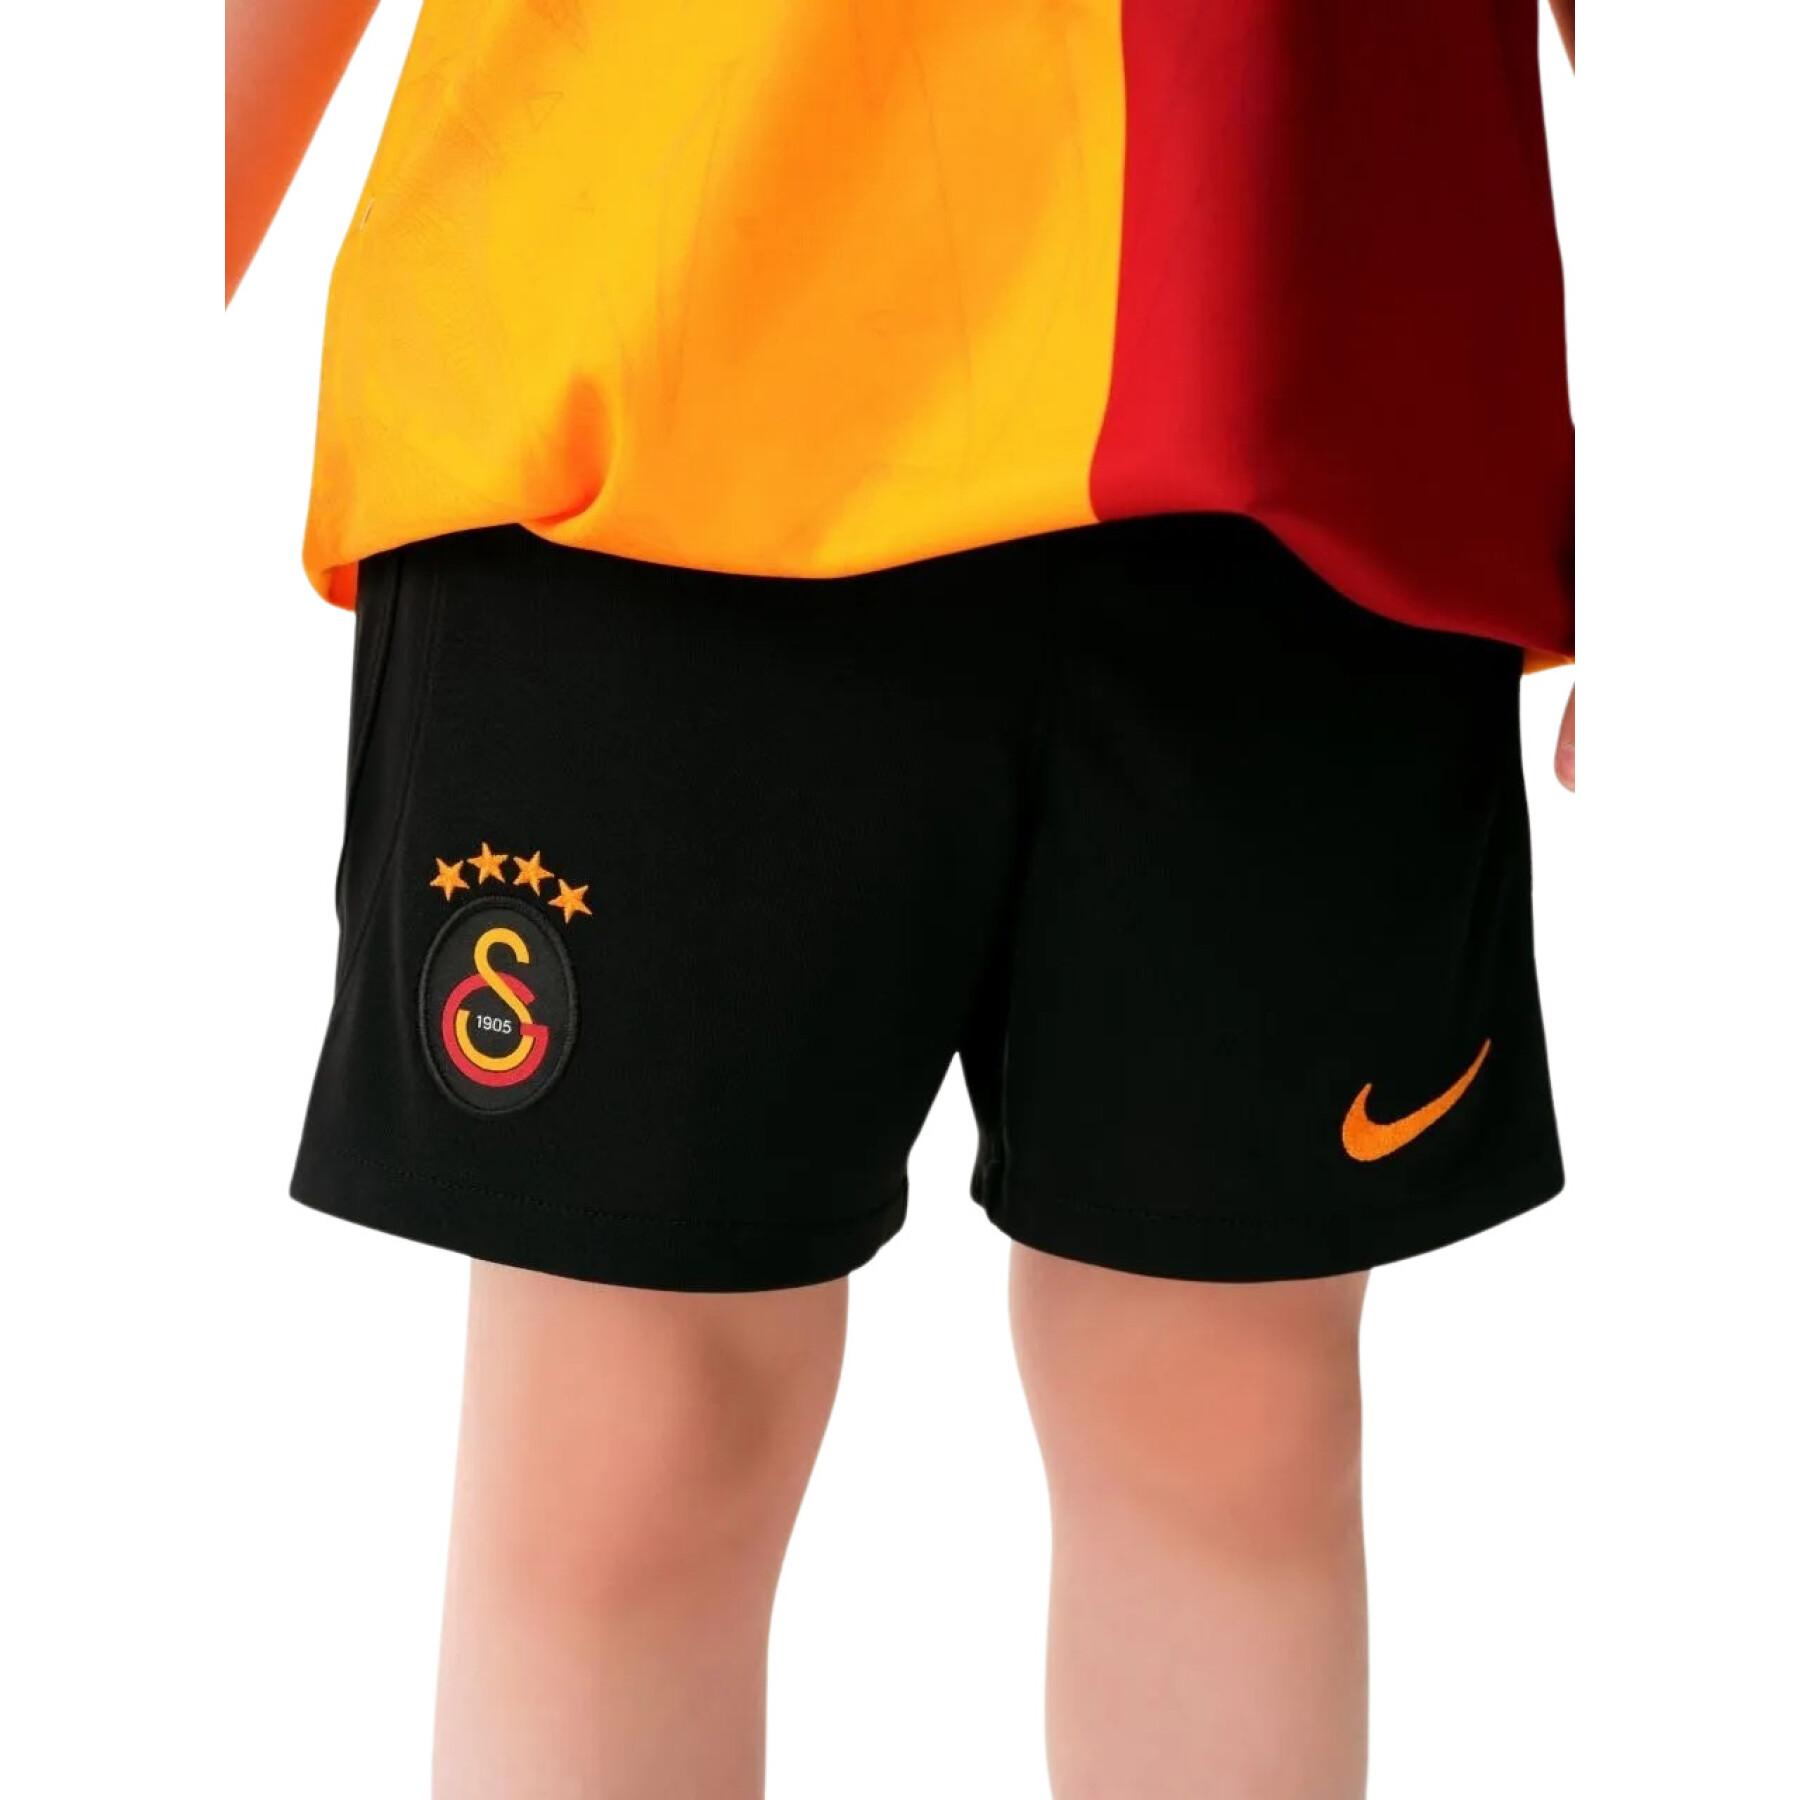 Children's home/office shorts Galatasaray 2022/23